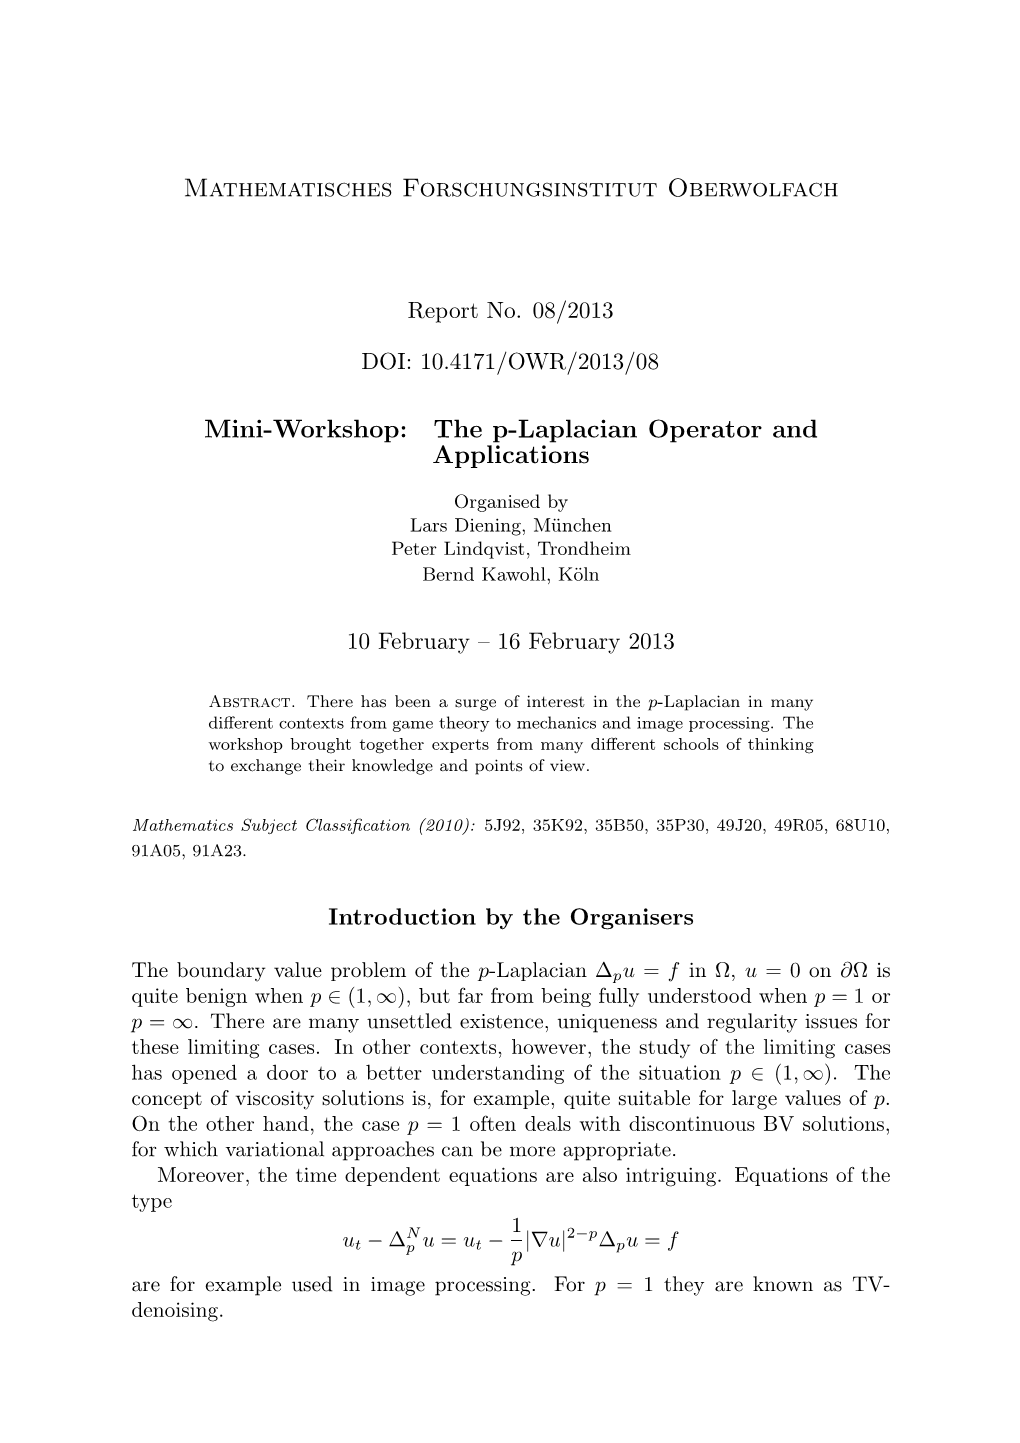 The P-Laplacian Operator and Applications